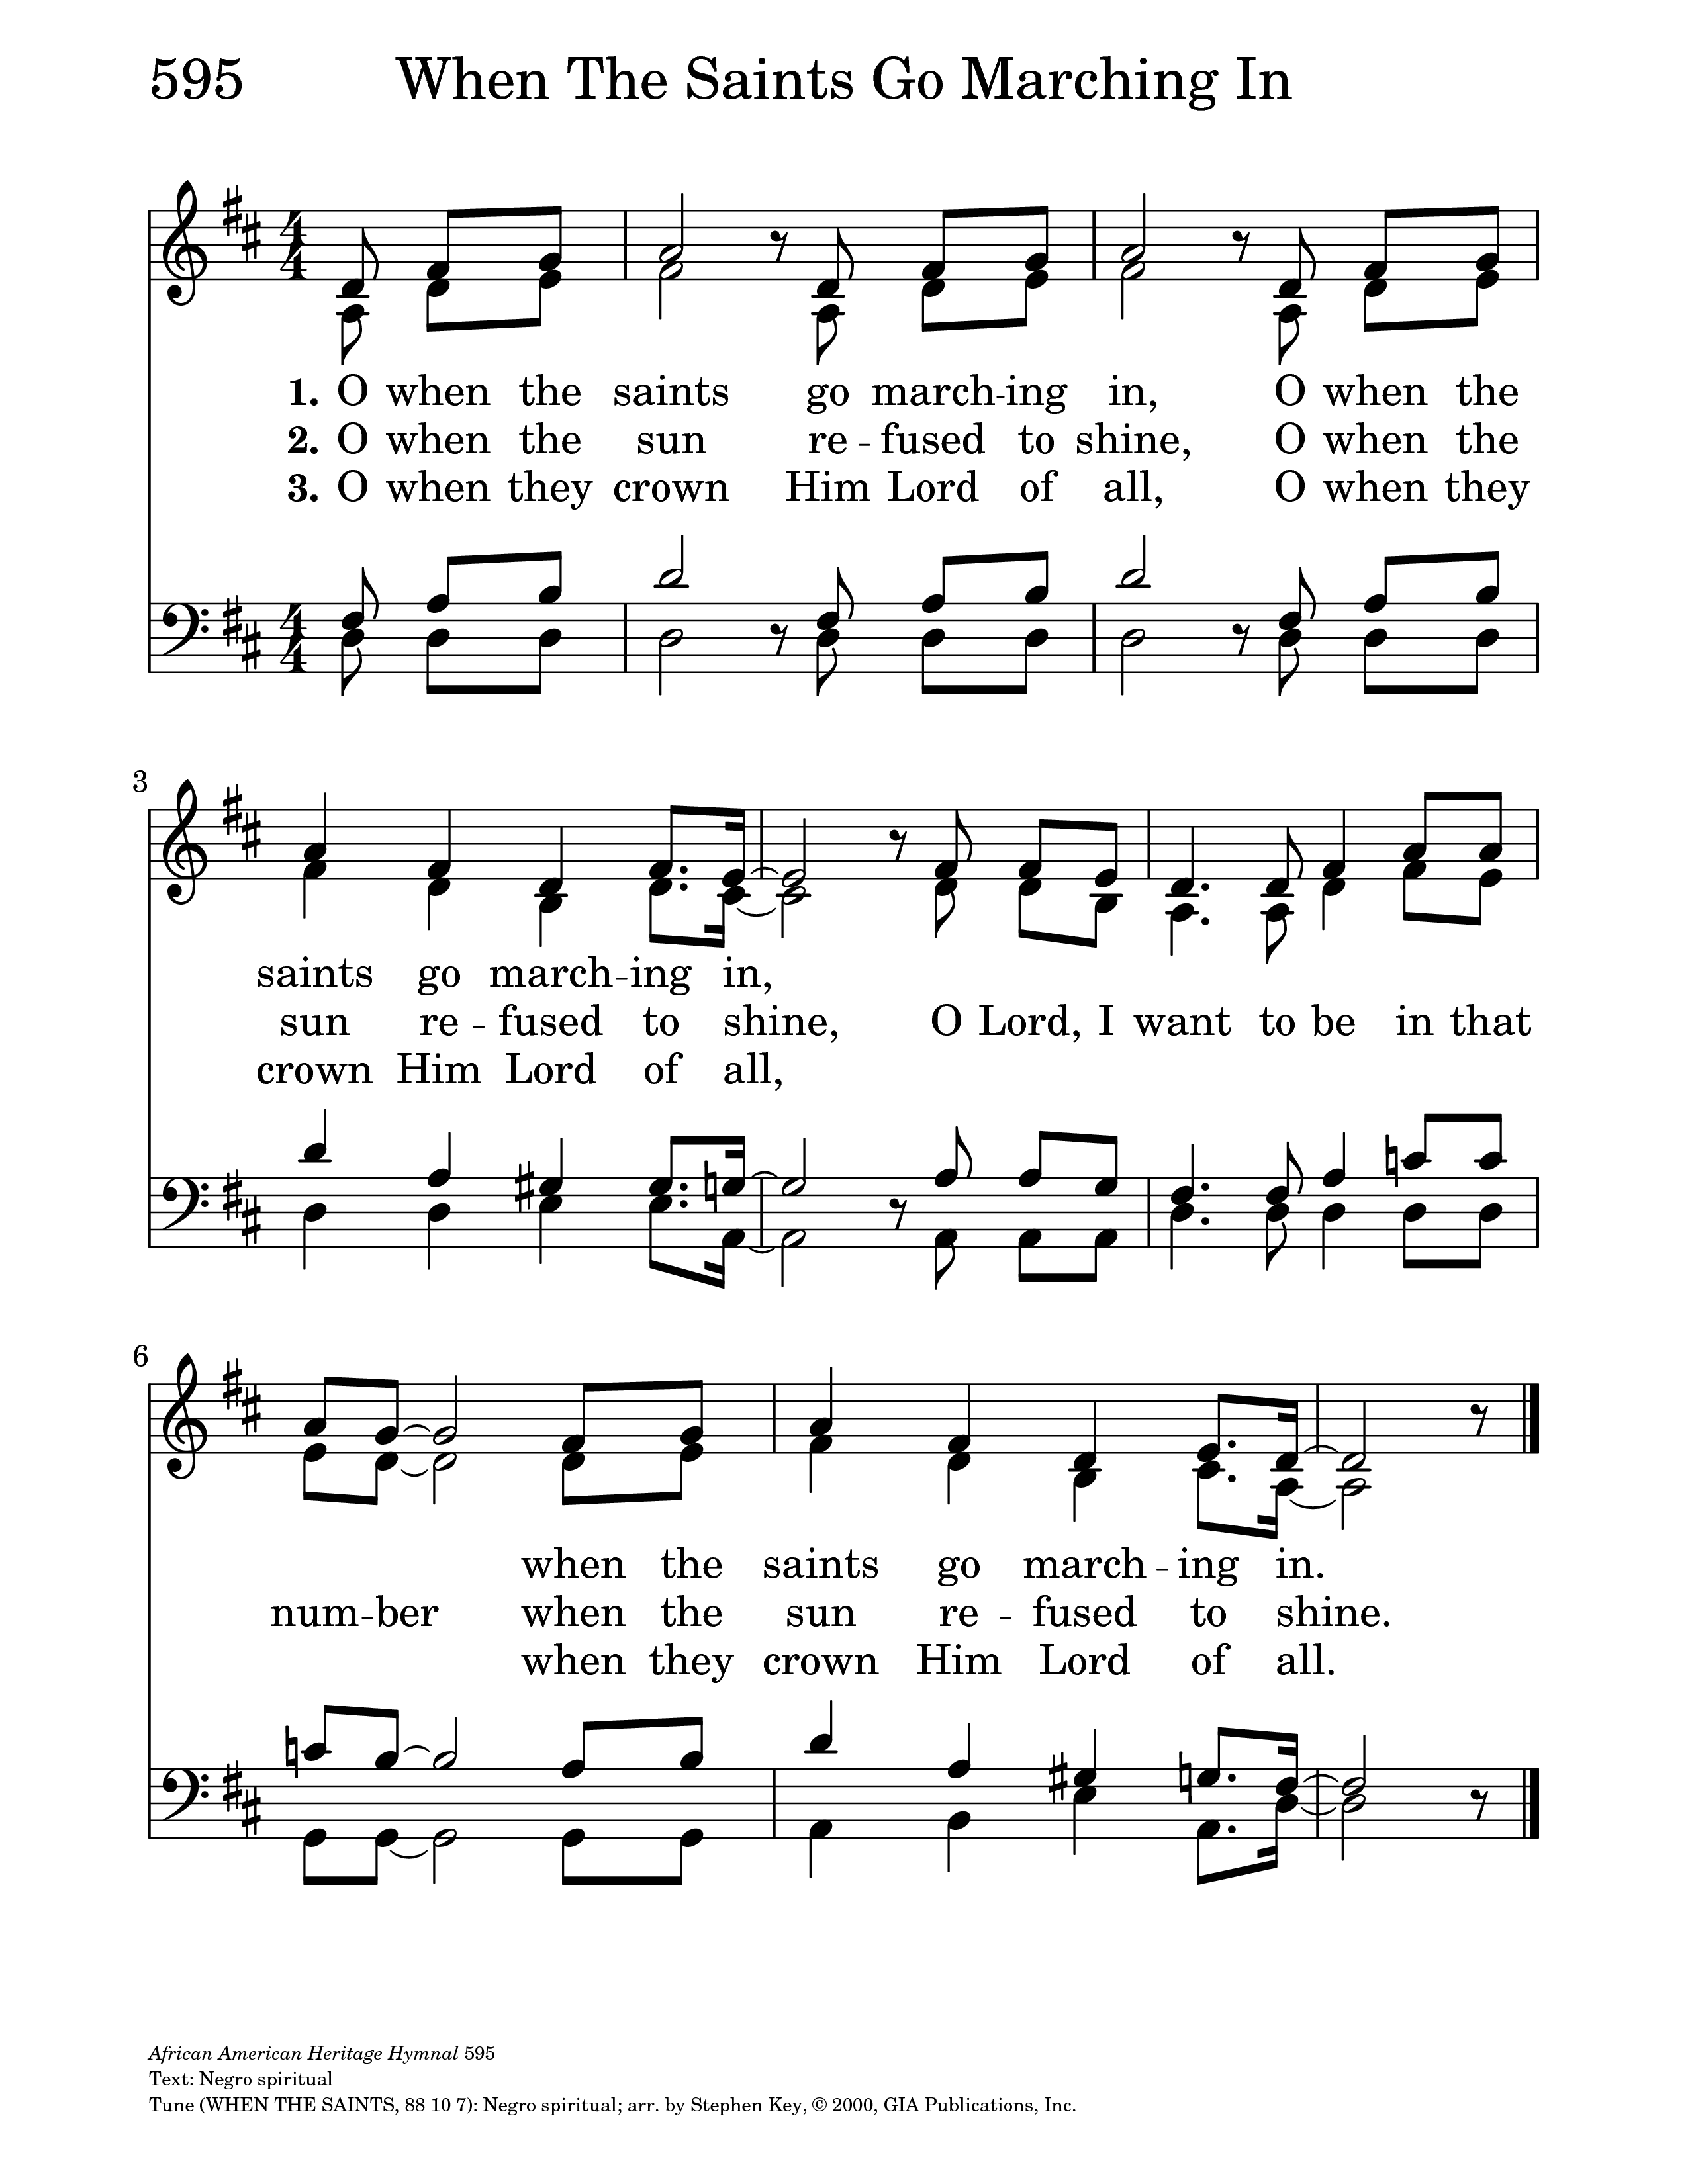 When The Saints Go Marching In | Hymnary.org